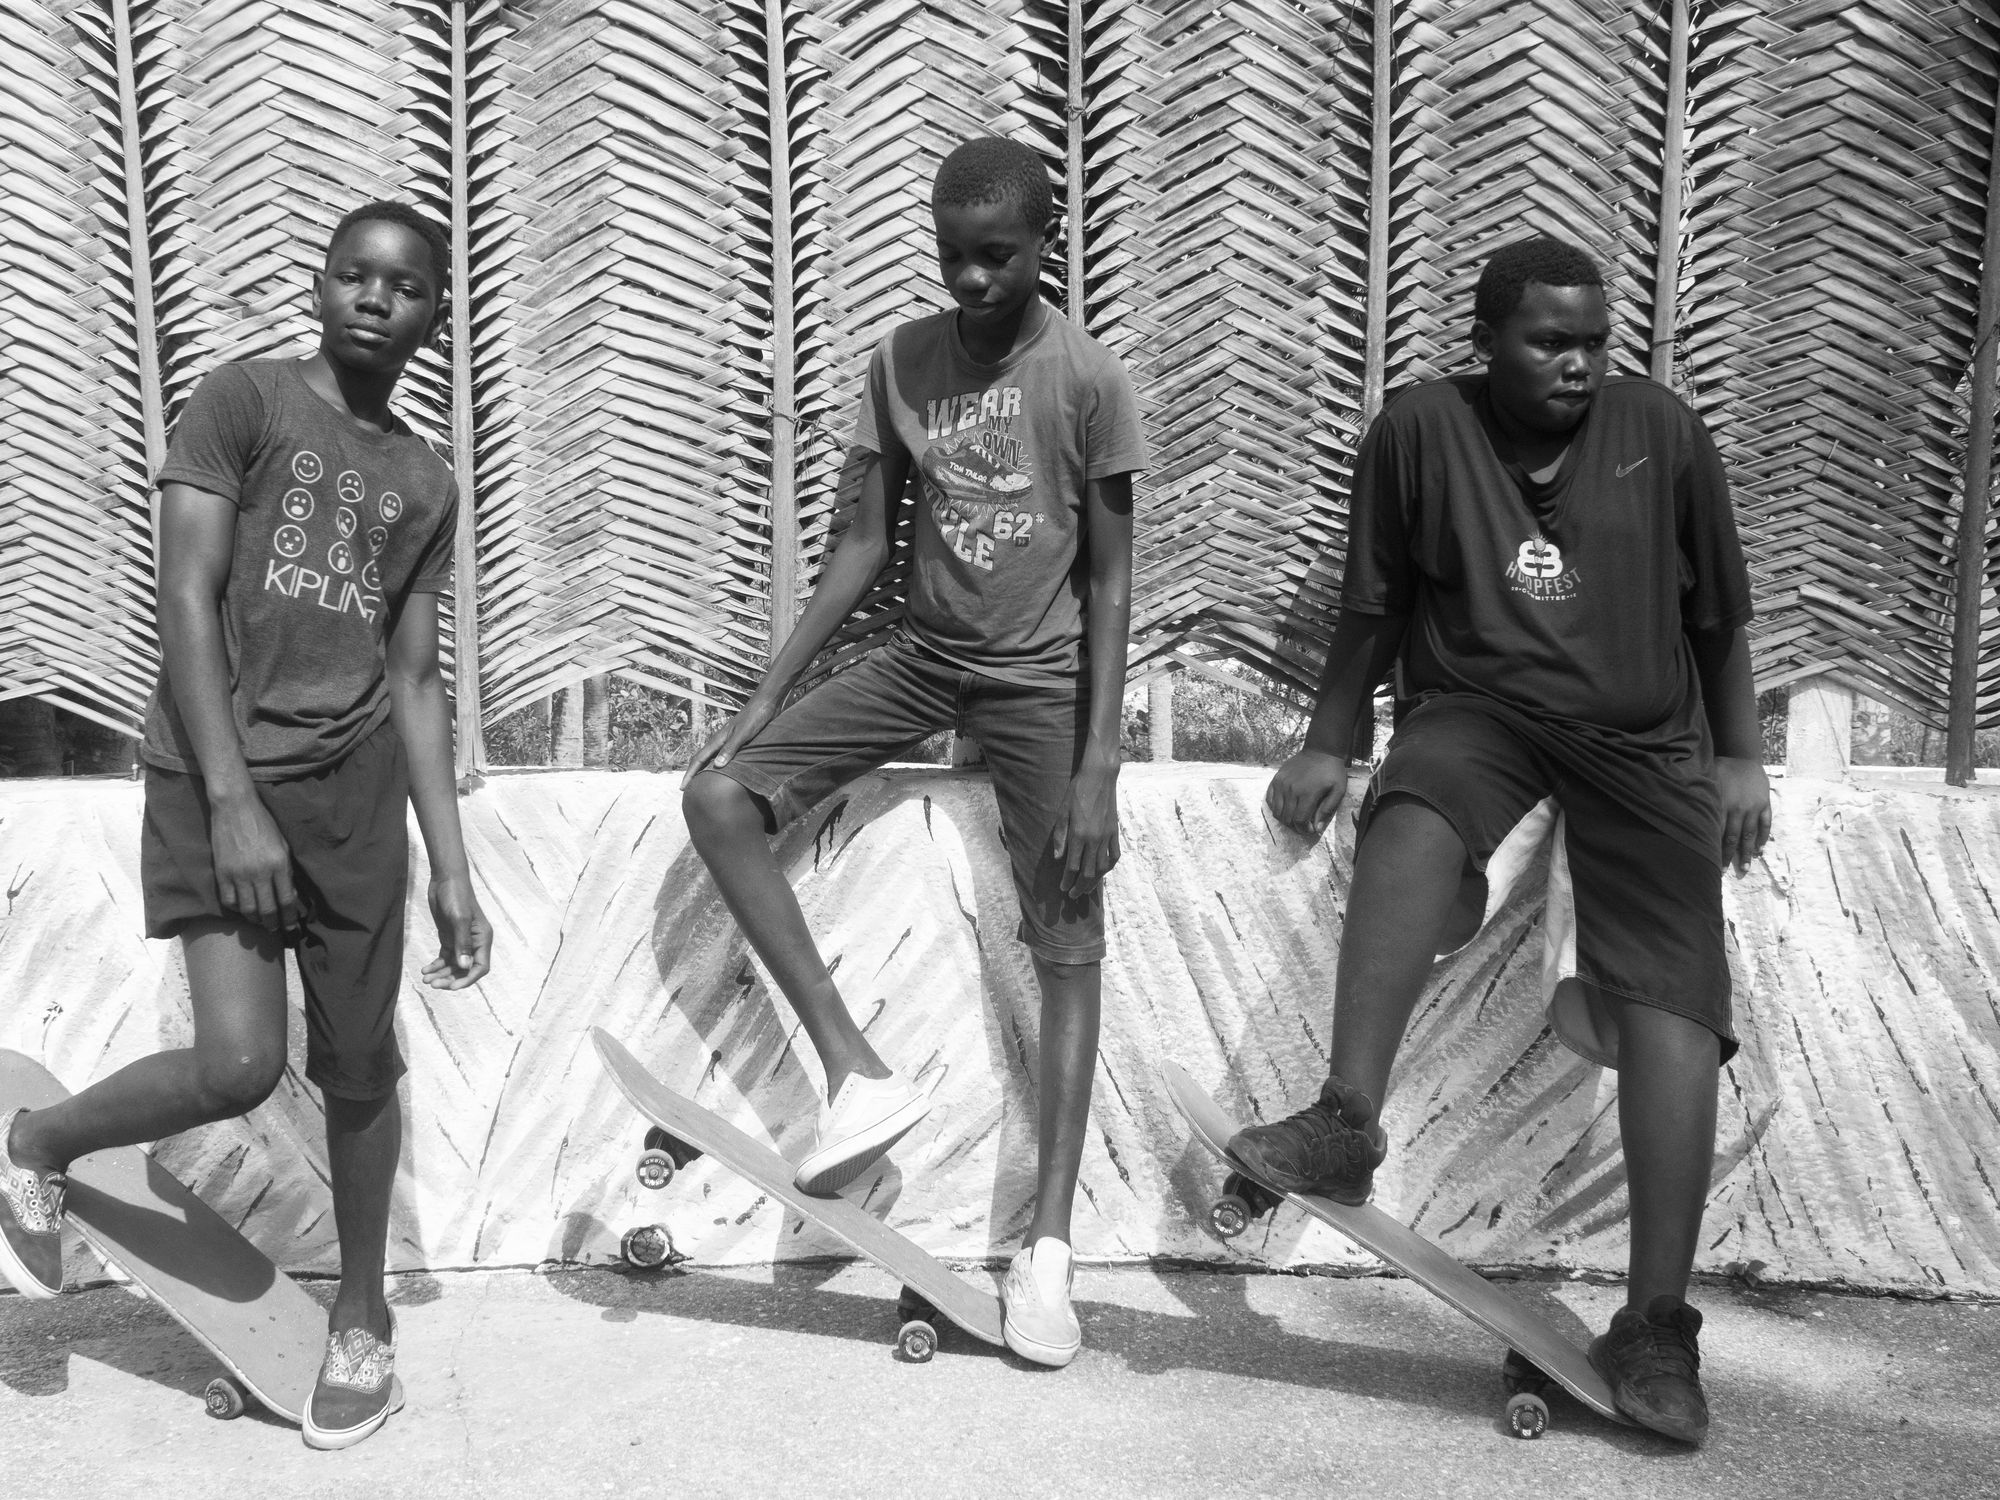 An image of three young skate-boarders